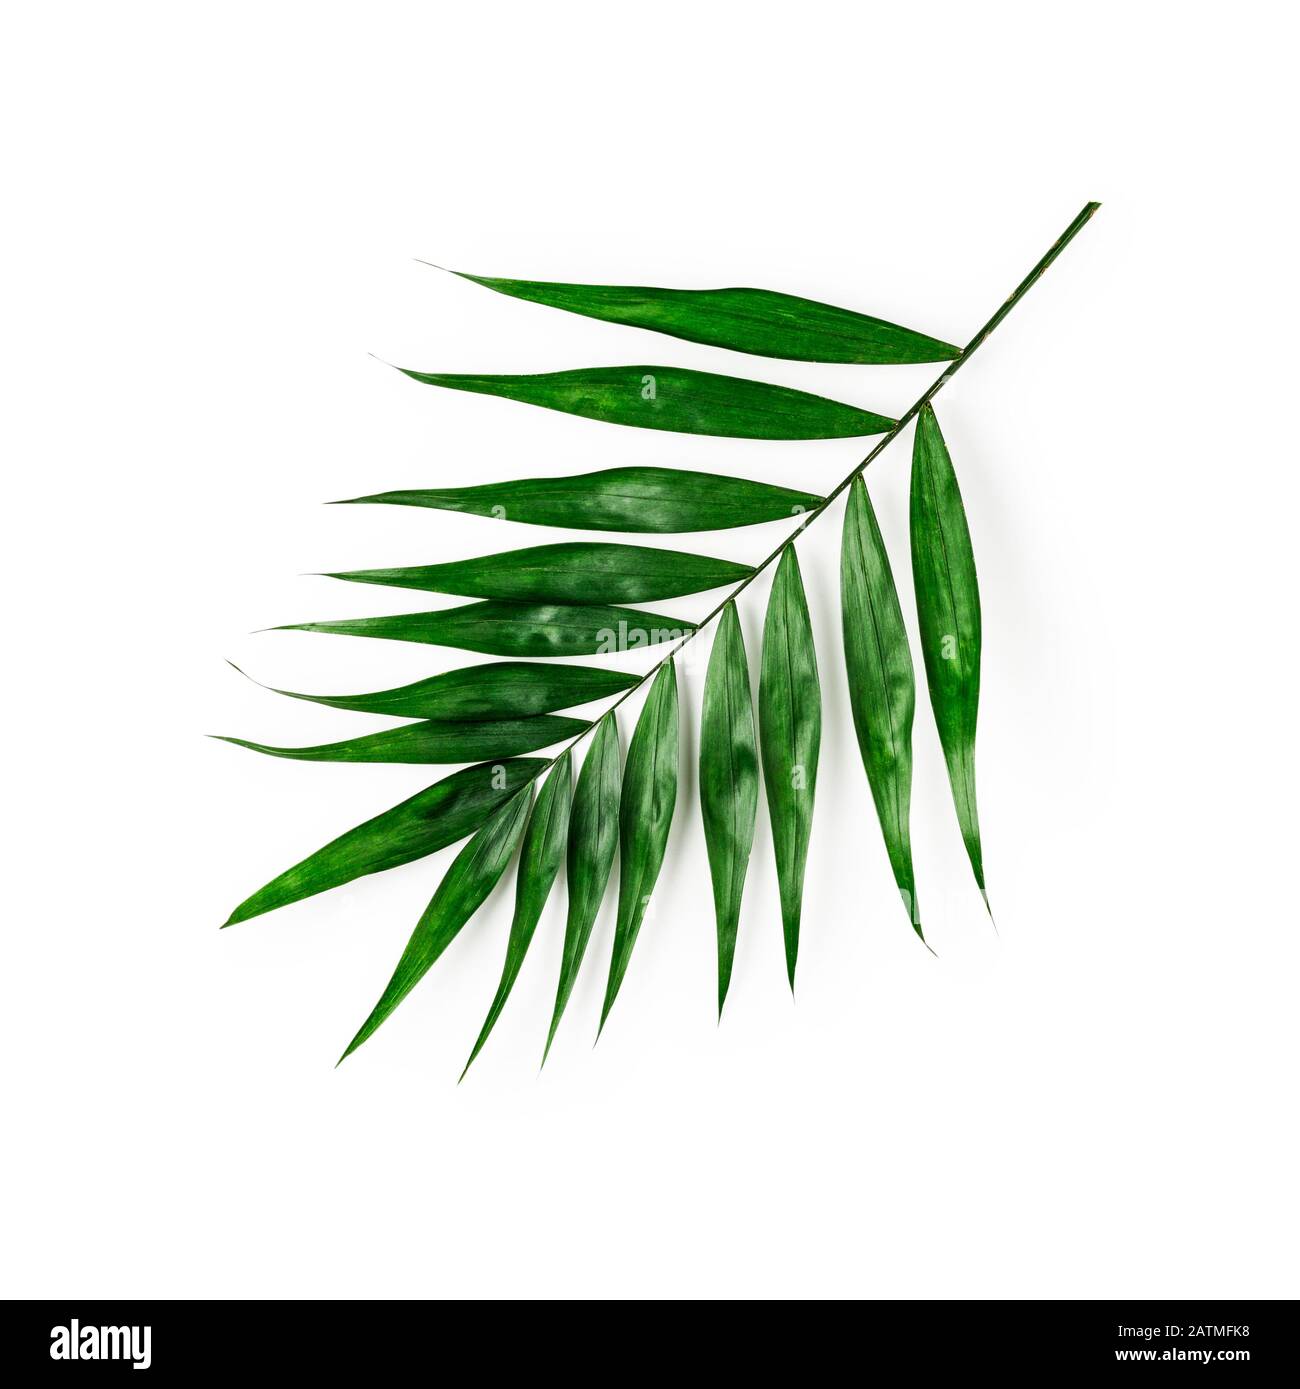 Green palm leaf, tropical jungle plant isolated on white background clipping path included. Top view, flat lay, design element Stock Photo